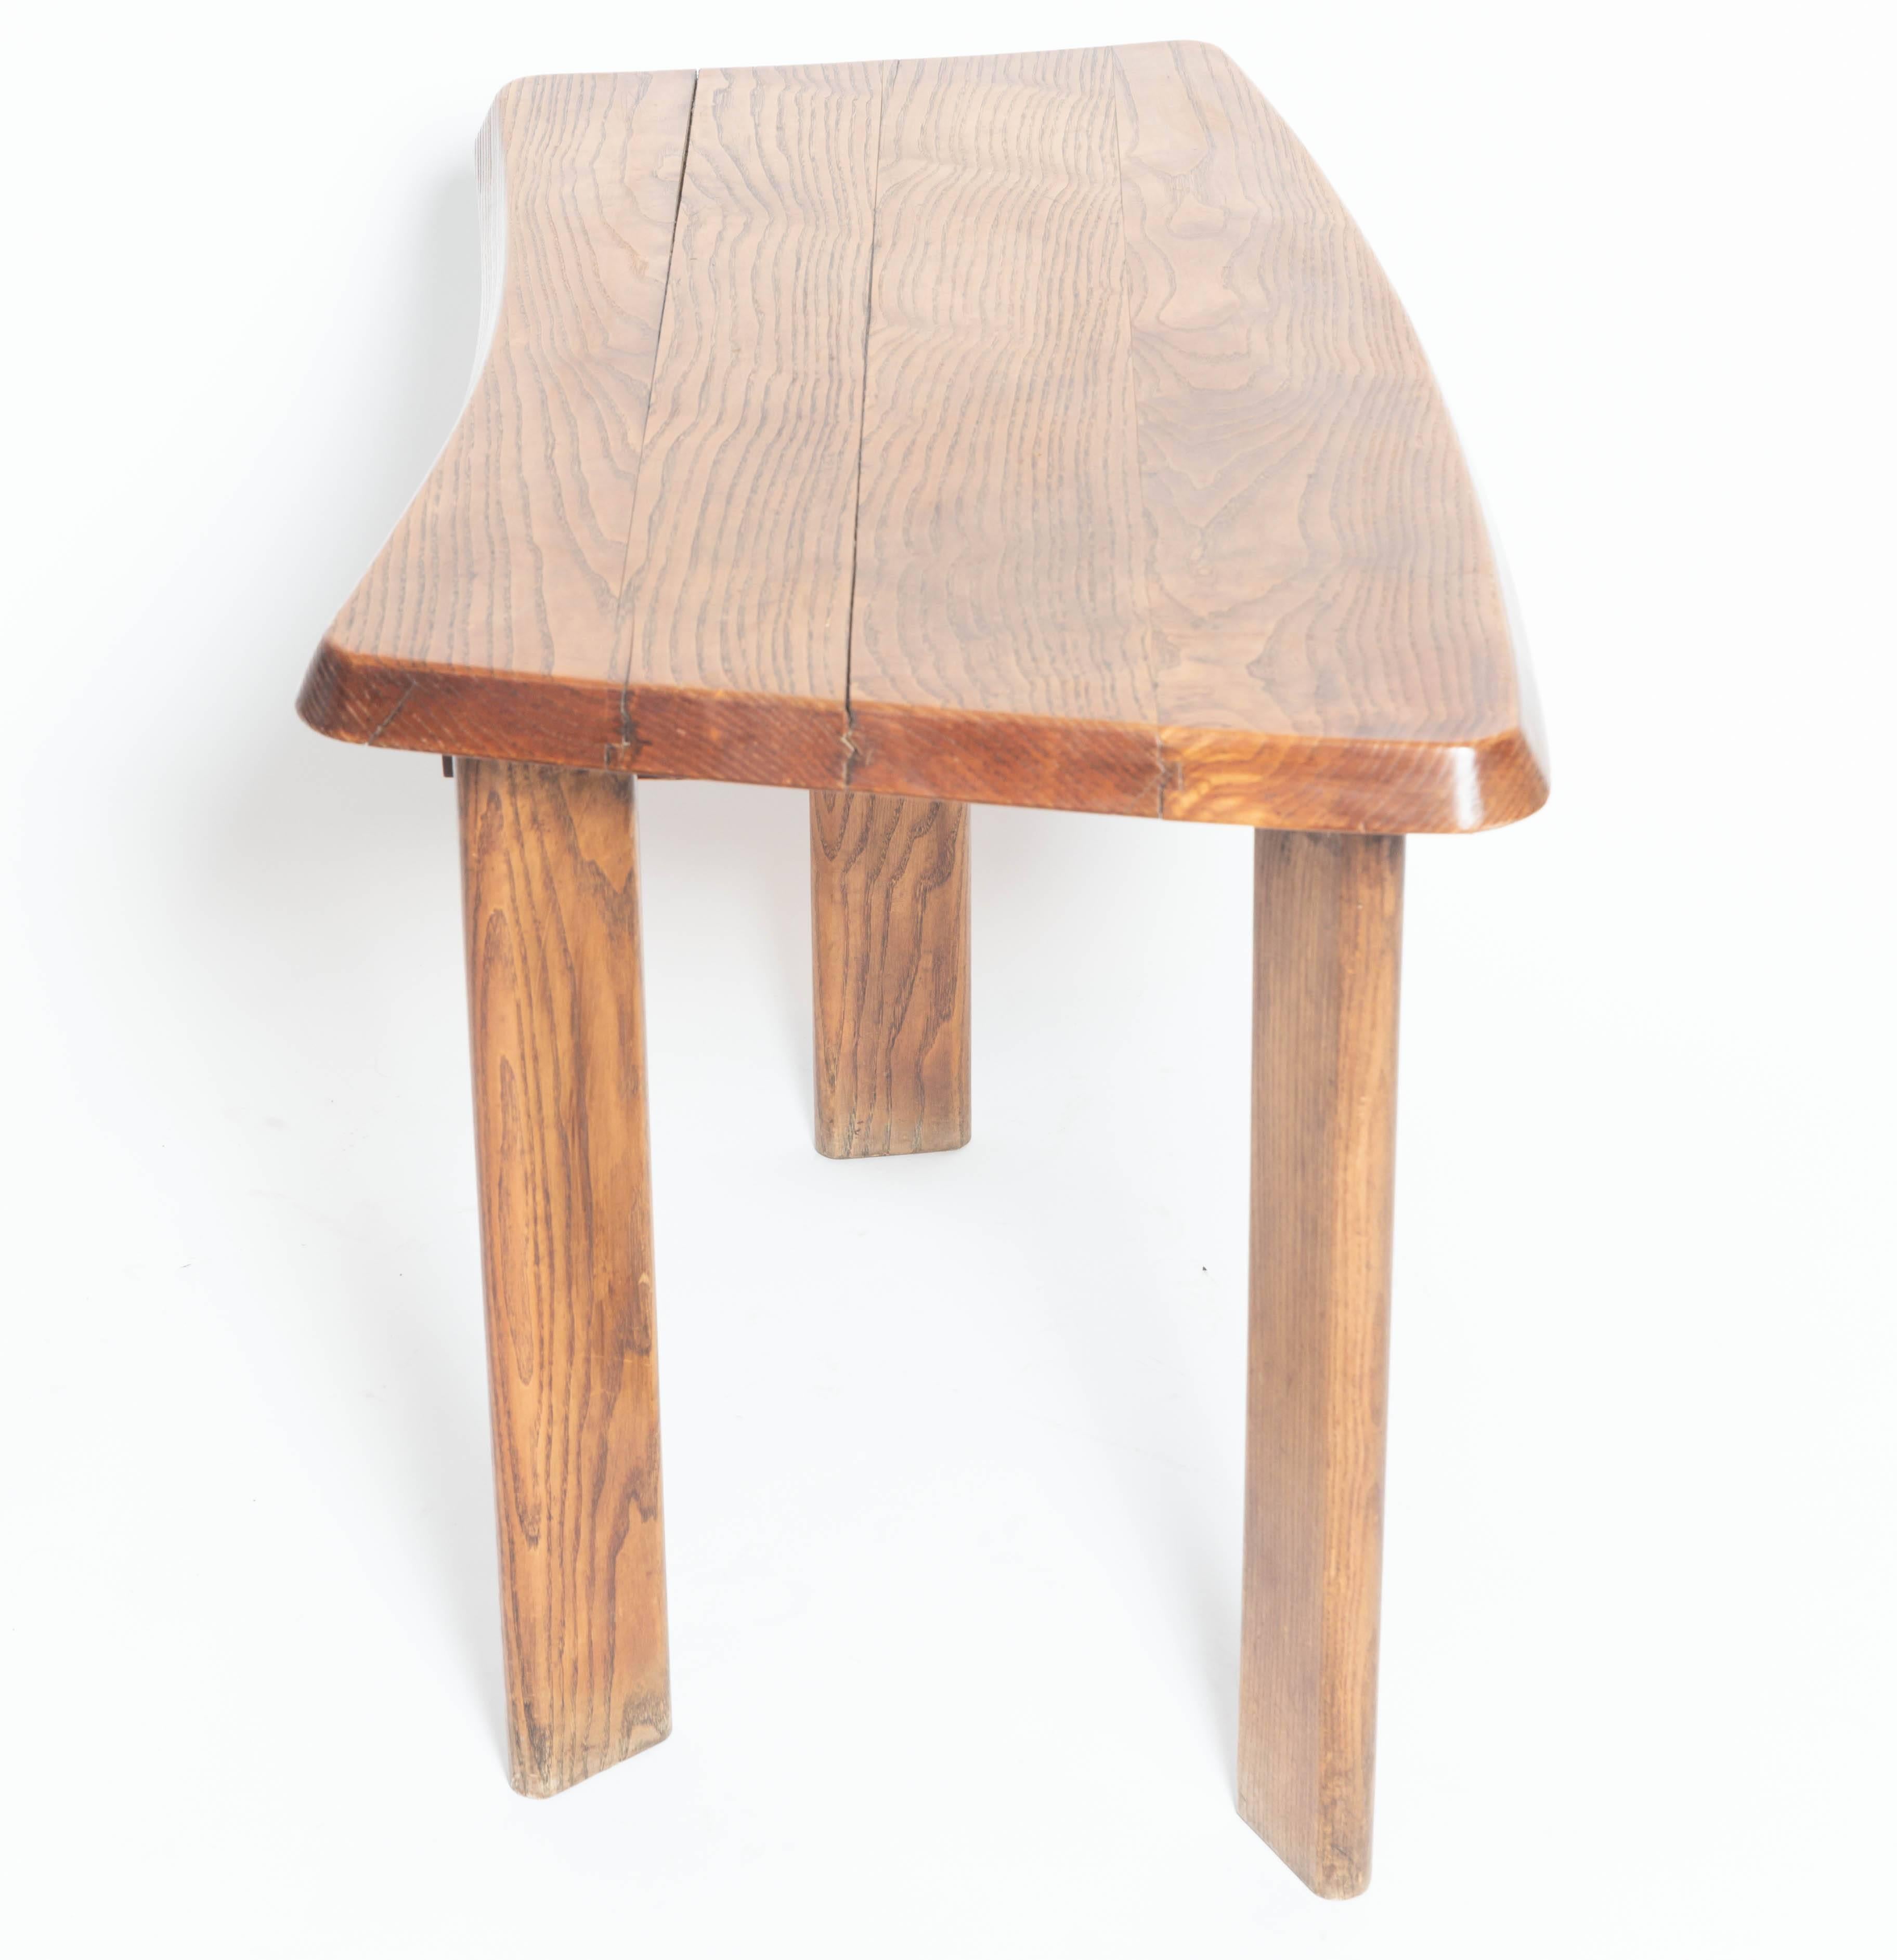 Mid-Century Modern Three-Legged Wooden Oak Table with Drawer, in the Manner of Charlotte Perriand